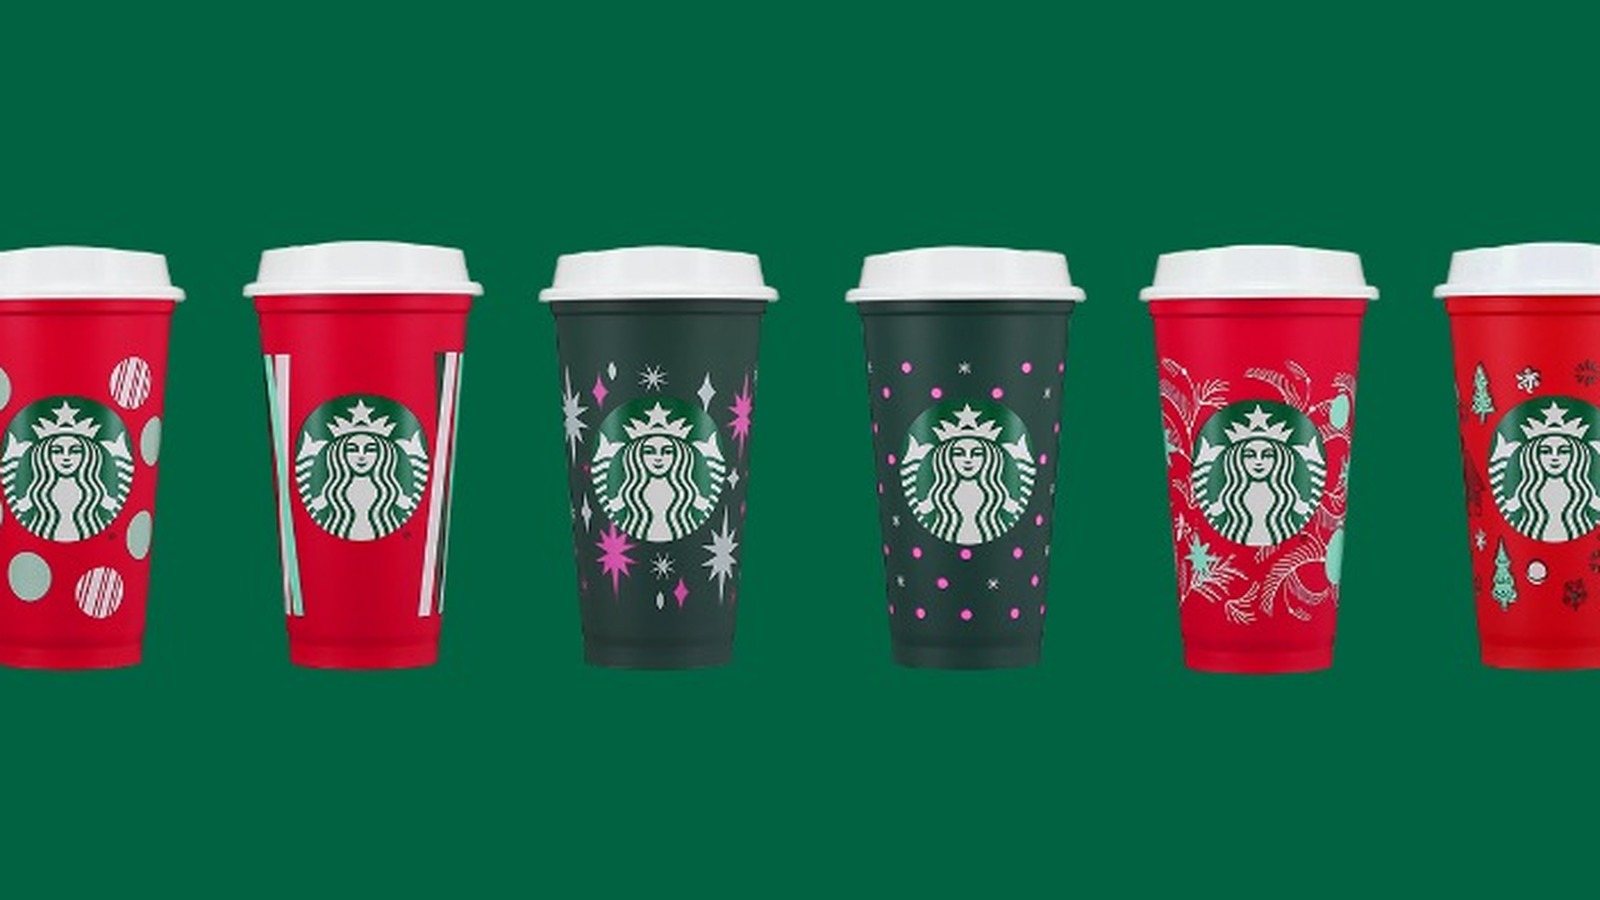 https://www.tastingtable.com/img/gallery/starbucks-2022-holiday-cup-lineup-features-some-eye-catching-designs/l-intro-1666121489.jpg